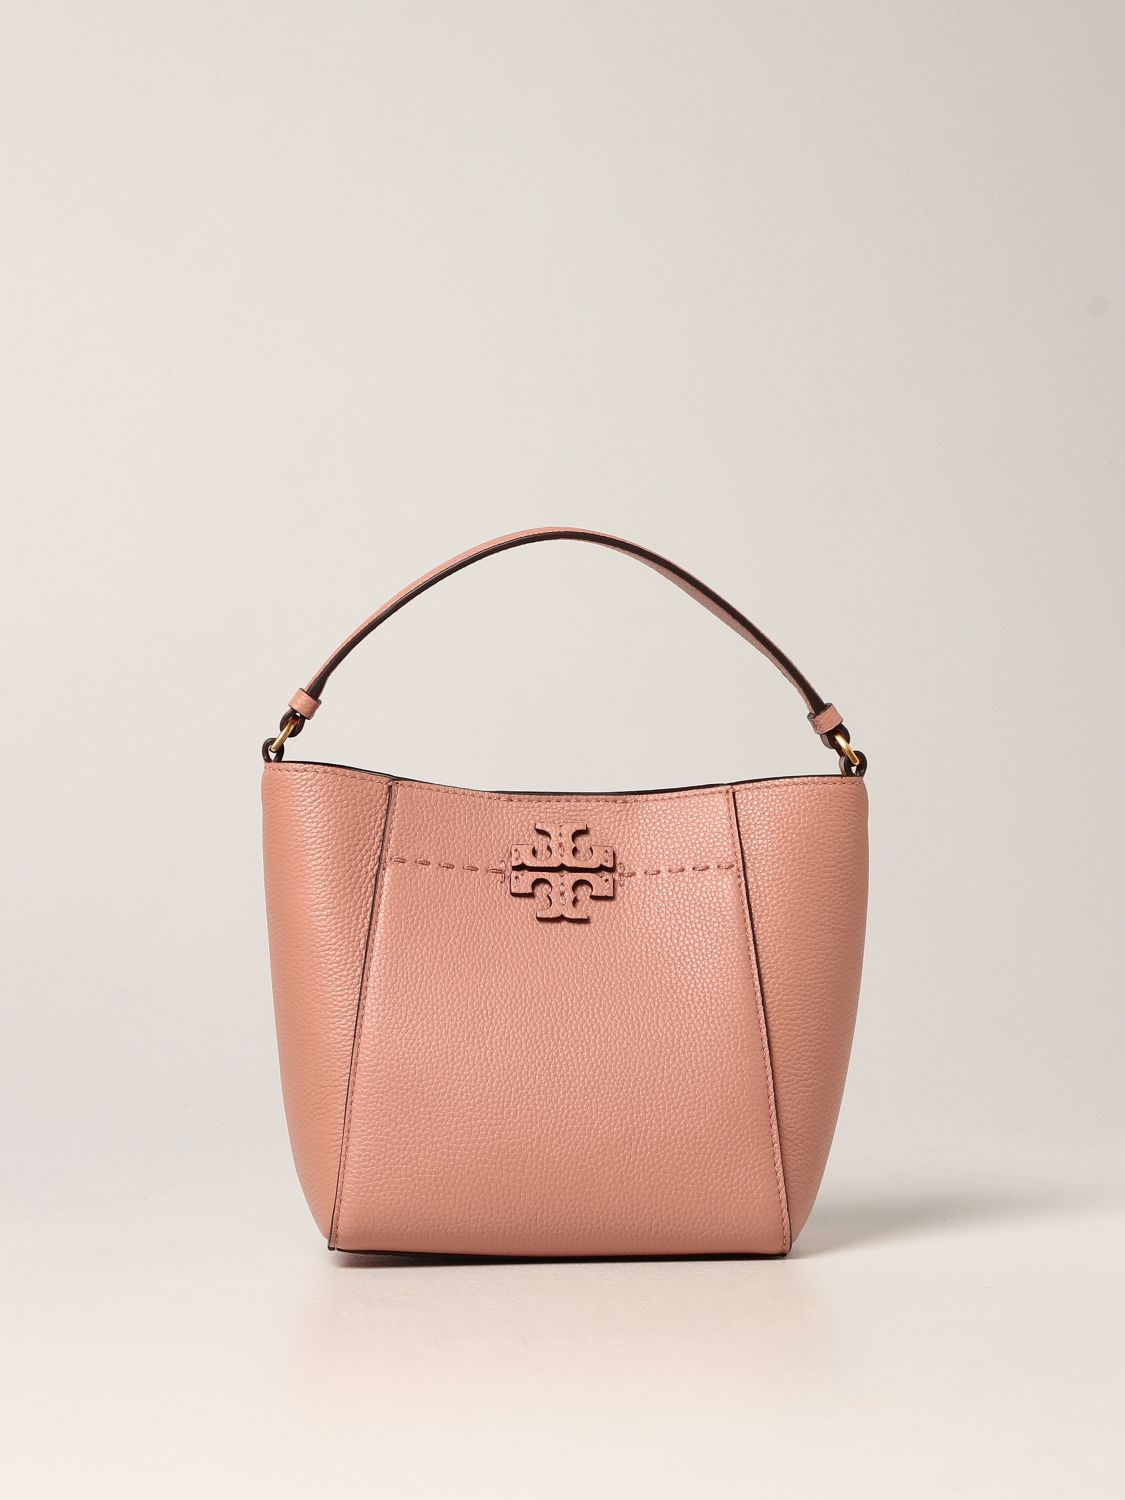 TORY BURCH: McGraw handbag in hammered leather - Pink | Tory Burch mini bag  74956 online on 